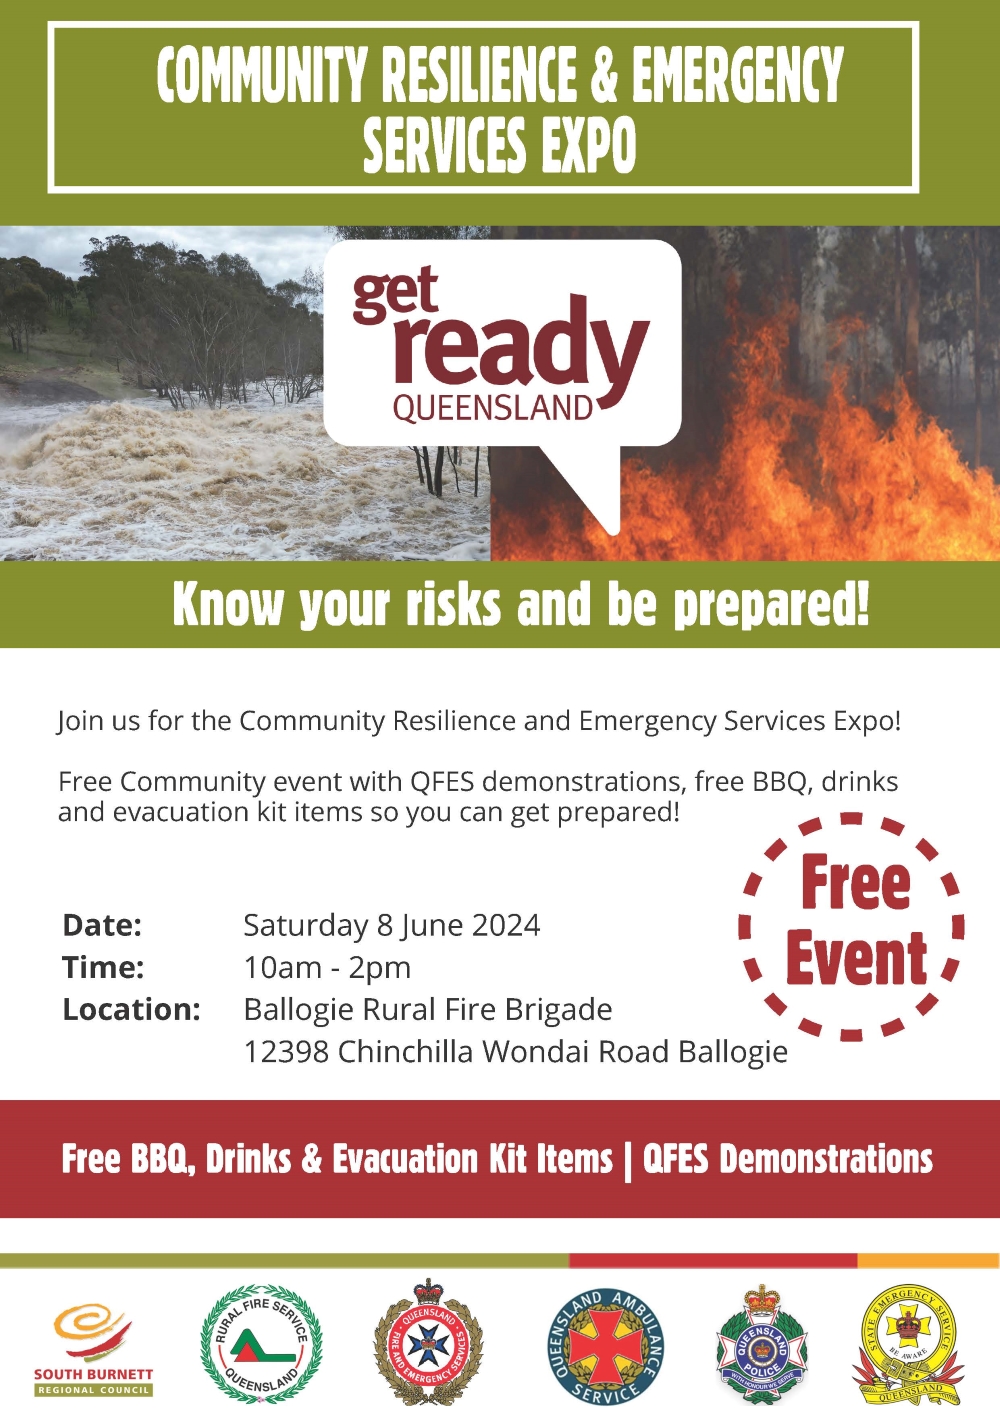 Community resilience and emergency services expo ballogie rural fire brigade 2